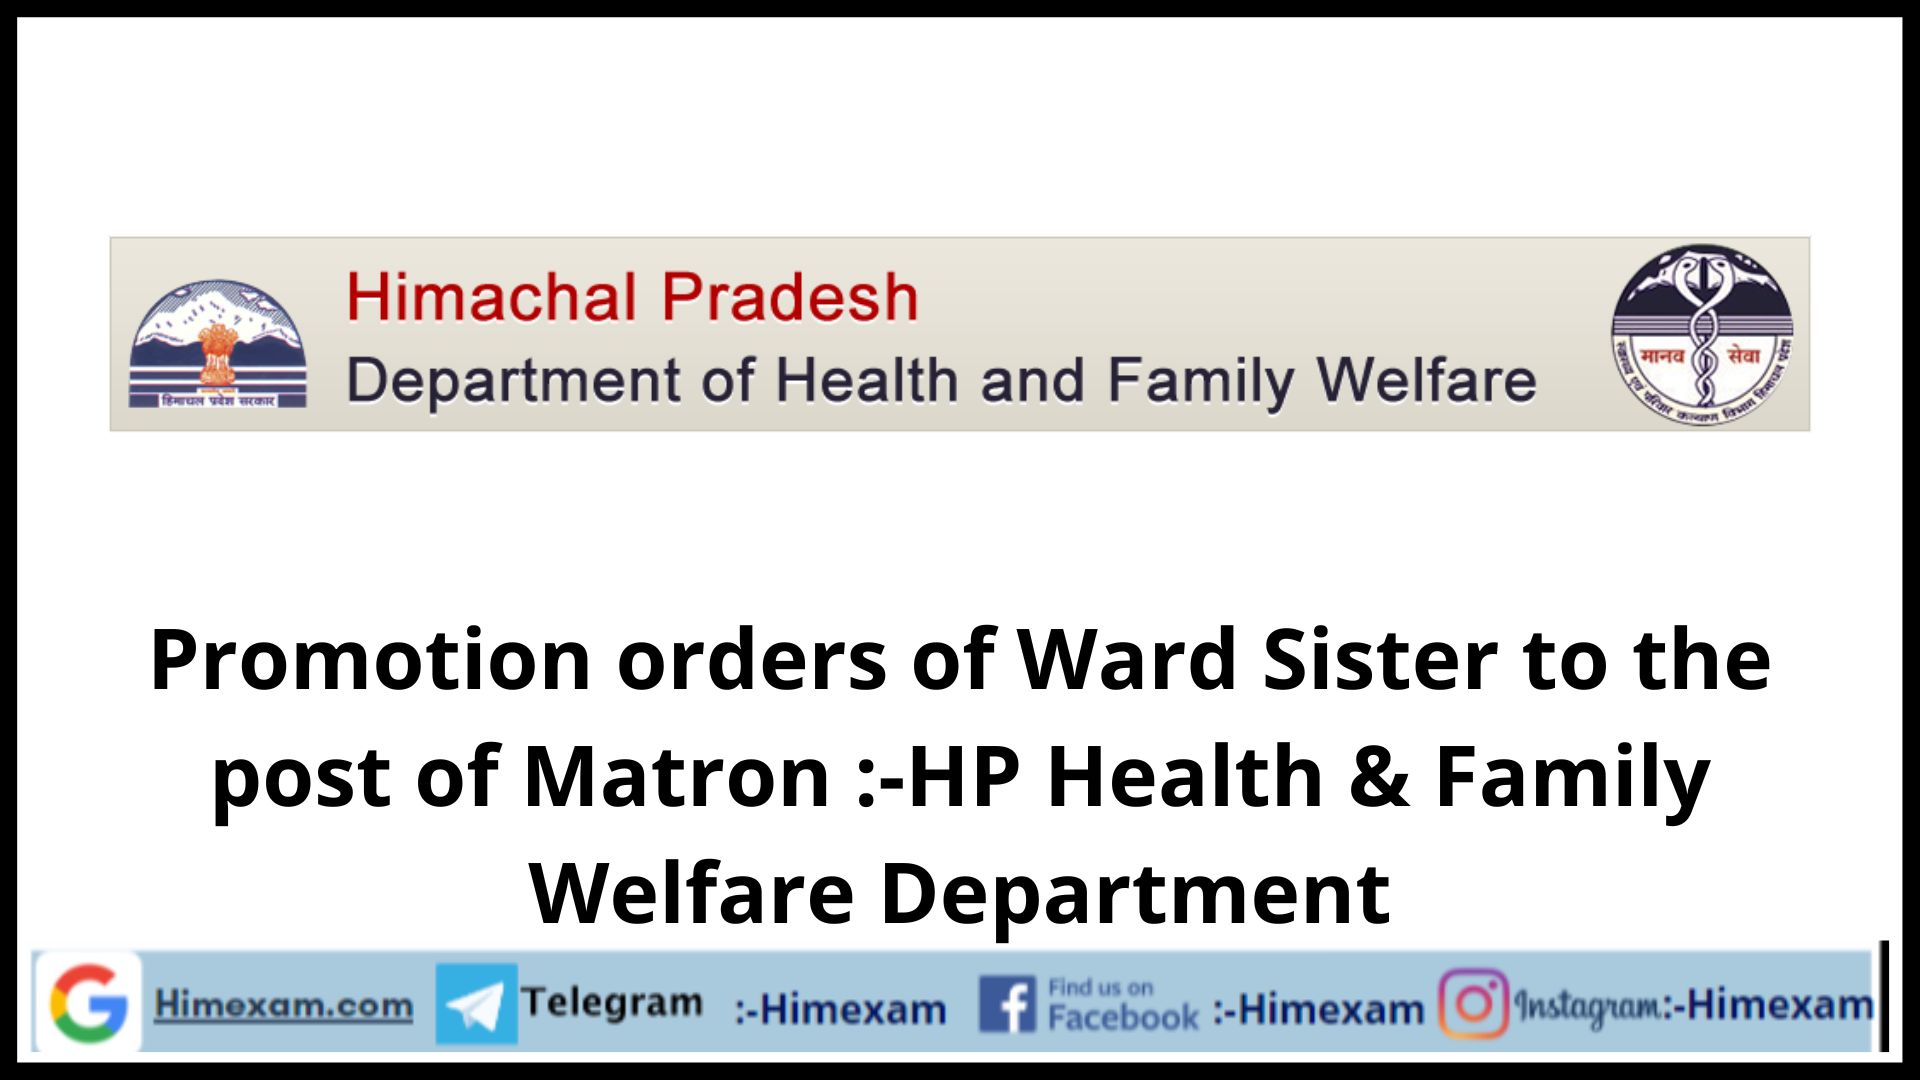 Promotion orders of Ward Sister to the post of Matron :-HP Health & Family Welfare Department